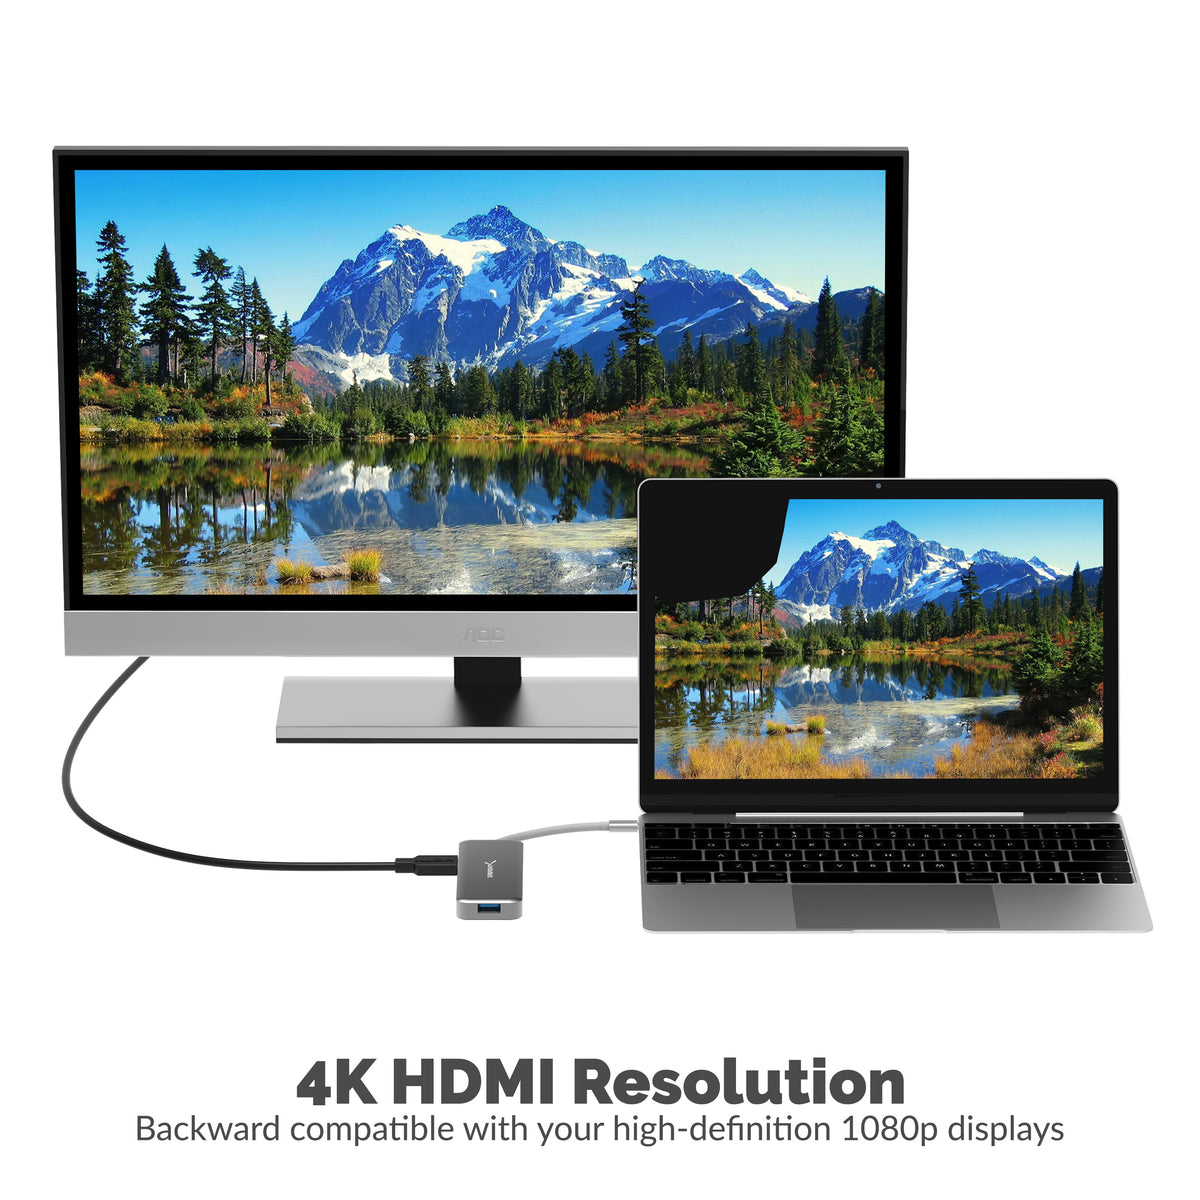 USB Type-C Hub with HDMI and 2 USB 3.0 Ports